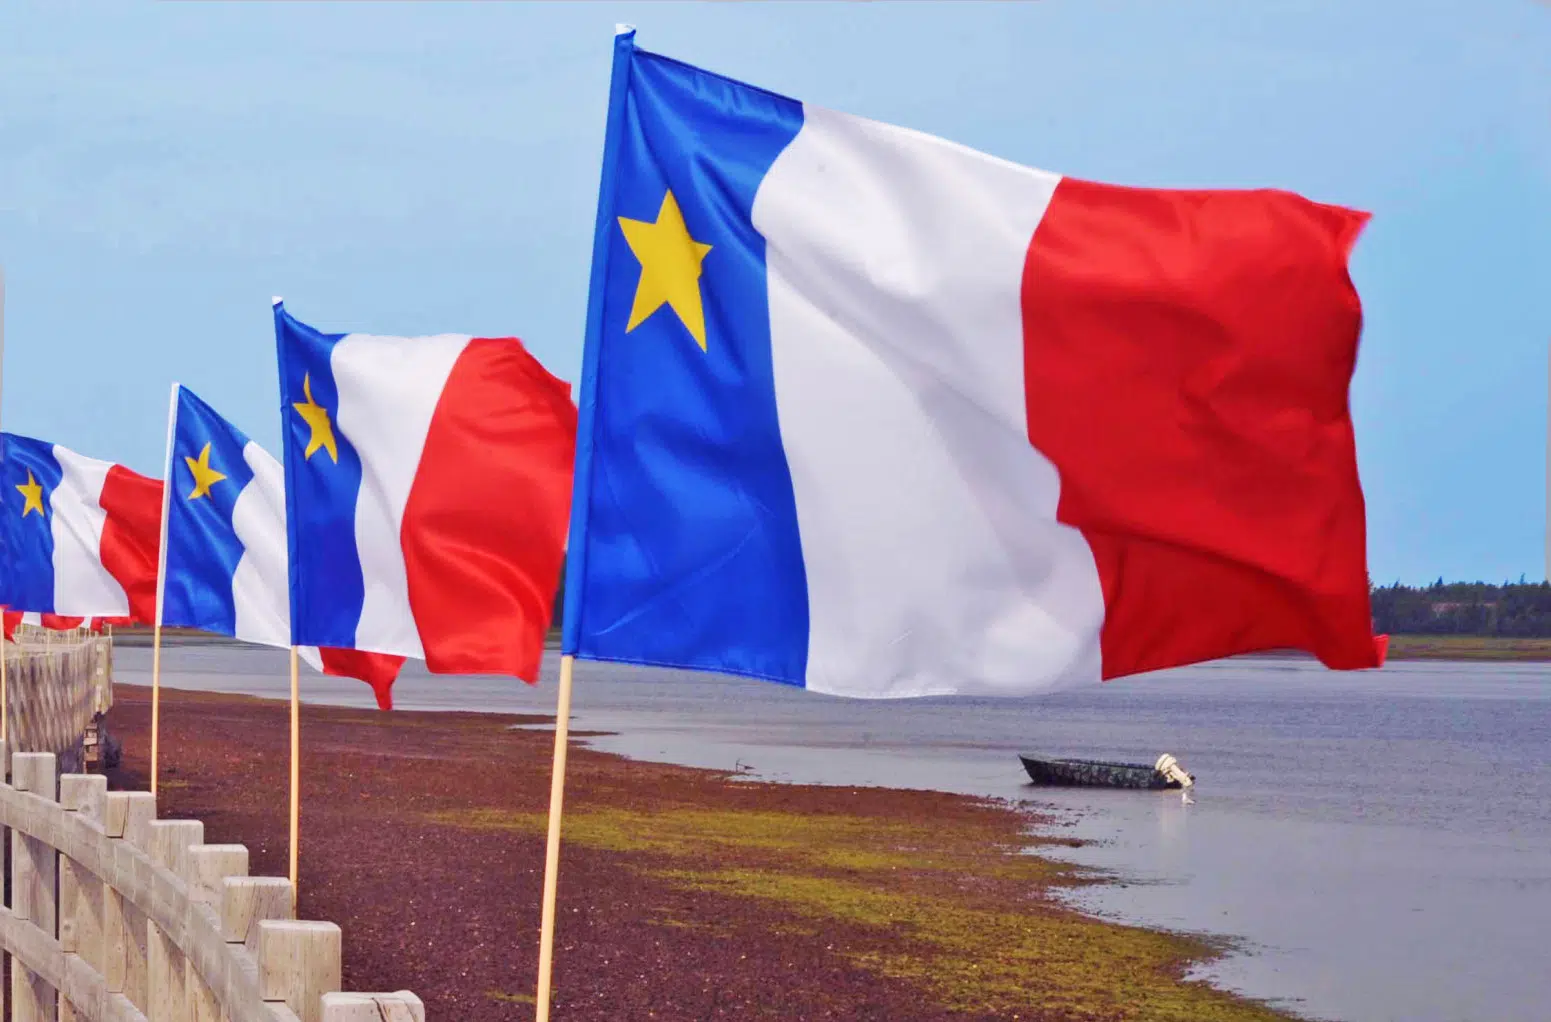 Happy National Acadian Day!